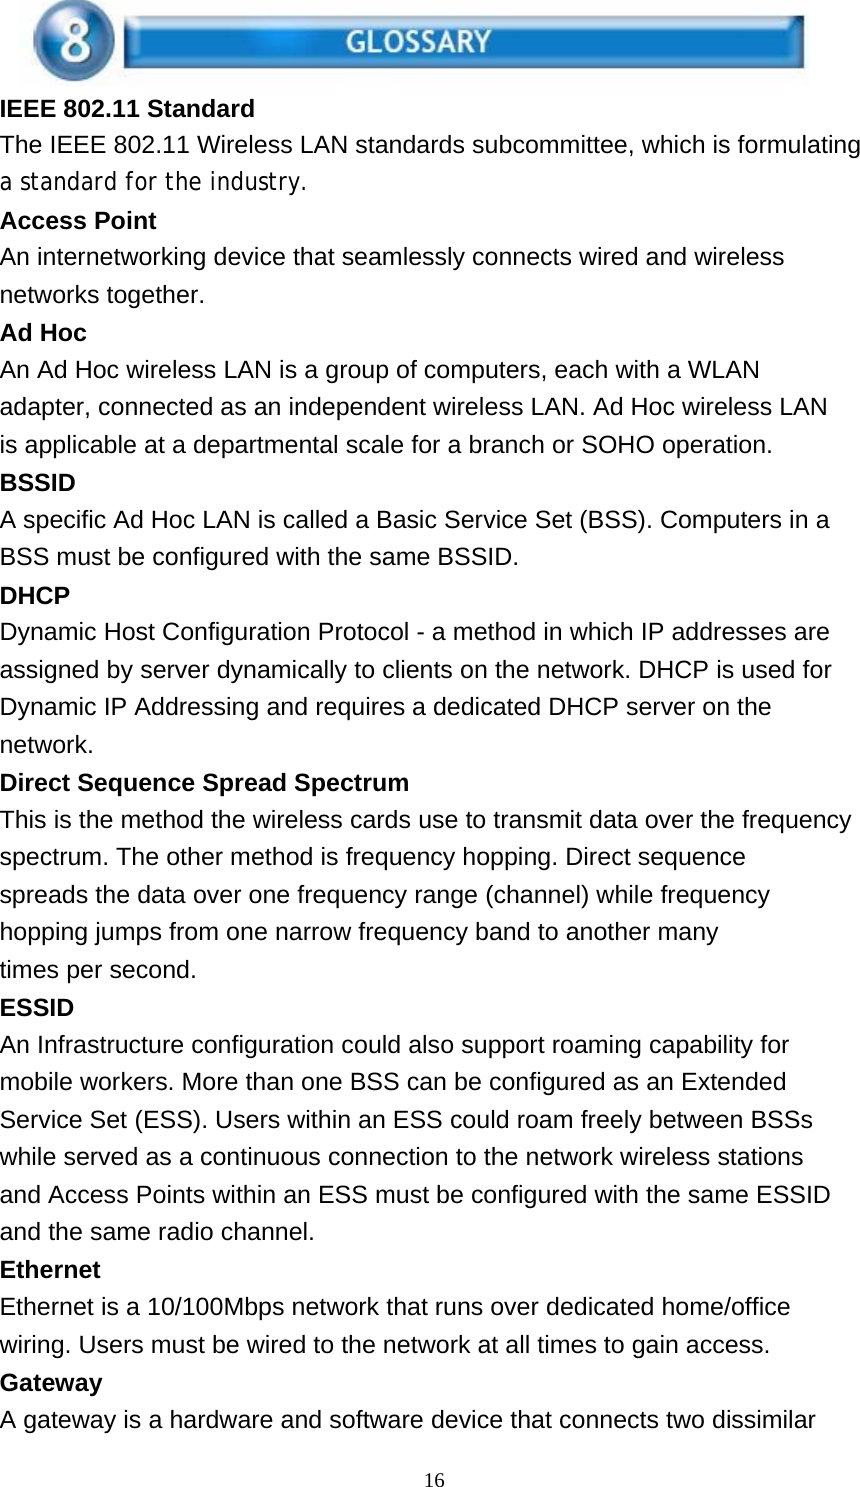 16    IEEE 802.11 Standard The IEEE 802.11 Wireless LAN standards subcommittee, which is formulating a standard for the industry. Access Point An internetworking device that seamlessly connects wired and wireless networks together. Ad Hoc An Ad Hoc wireless LAN is a group of computers, each with a WLAN adapter, connected as an independent wireless LAN. Ad Hoc wireless LAN is applicable at a departmental scale for a branch or SOHO operation. BSSID A specific Ad Hoc LAN is called a Basic Service Set (BSS). Computers in a BSS must be configured with the same BSSID. DHCP Dynamic Host Configuration Protocol - a method in which IP addresses are assigned by server dynamically to clients on the network. DHCP is used for Dynamic IP Addressing and requires a dedicated DHCP server on the network. Direct Sequence Spread Spectrum This is the method the wireless cards use to transmit data over the frequency spectrum. The other method is frequency hopping. Direct sequence spreads the data over one frequency range (channel) while frequency hopping jumps from one narrow frequency band to another many times per second. ESSID An Infrastructure configuration could also support roaming capability for mobile workers. More than one BSS can be configured as an Extended Service Set (ESS). Users within an ESS could roam freely between BSSs while served as a continuous connection to the network wireless stations and Access Points within an ESS must be configured with the same ESSID and the same radio channel. Ethernet Ethernet is a 10/100Mbps network that runs over dedicated home/office wiring. Users must be wired to the network at all times to gain access. Gateway A gateway is a hardware and software device that connects two dissimilar 